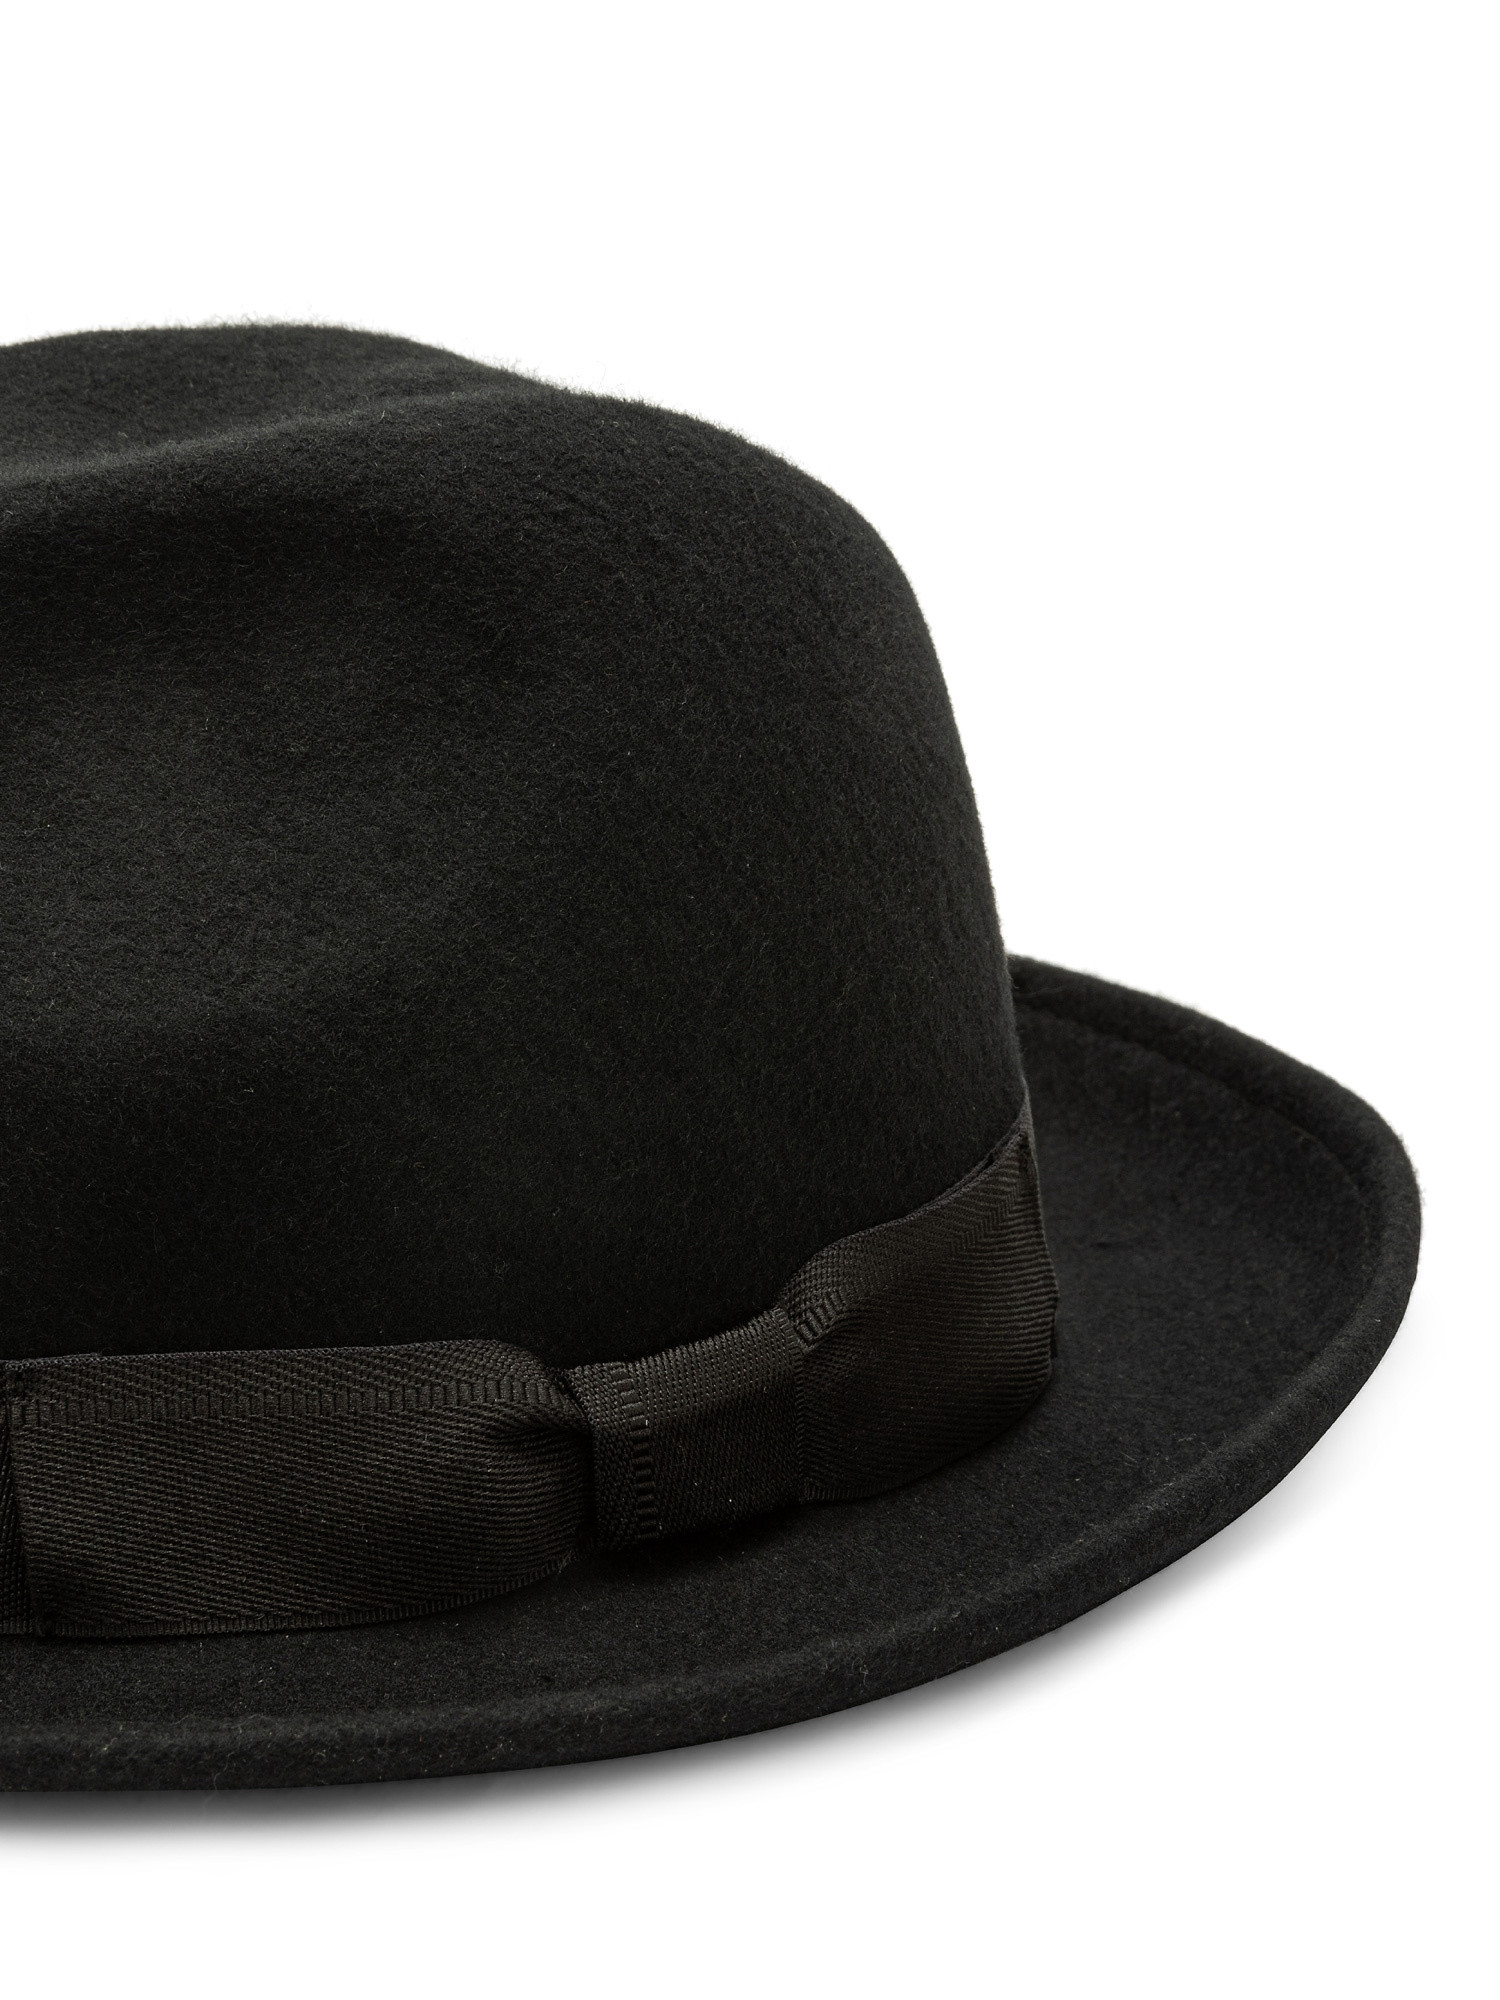 Cappello loden, Nero, large image number 1